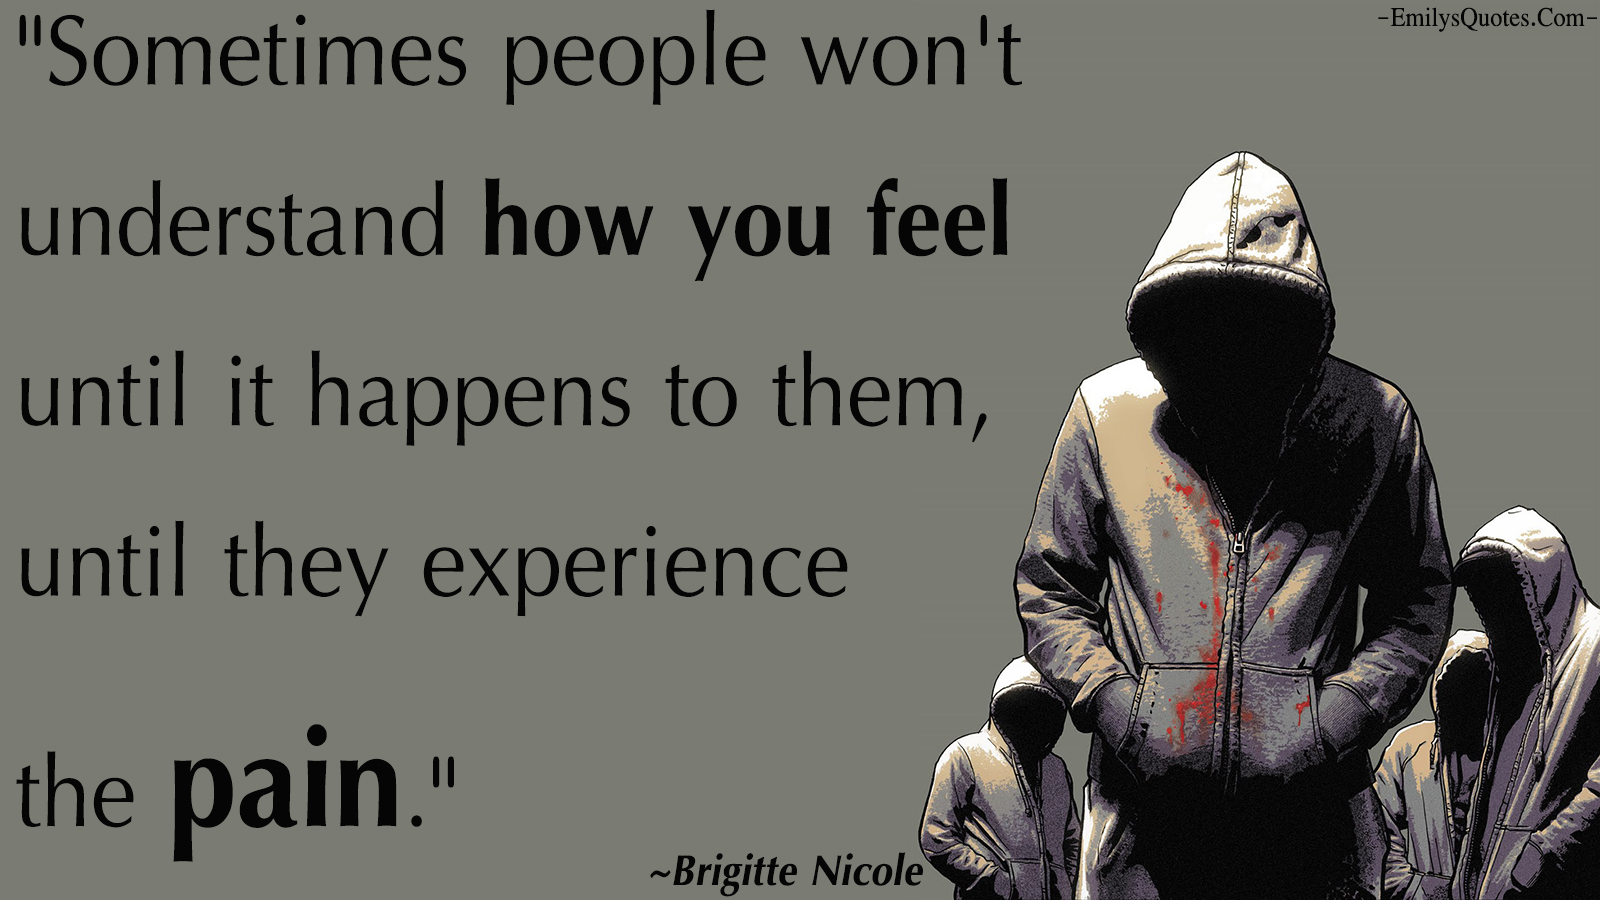 Sometimes people won’t understand how you feel until it happens to them, until they experience the pain